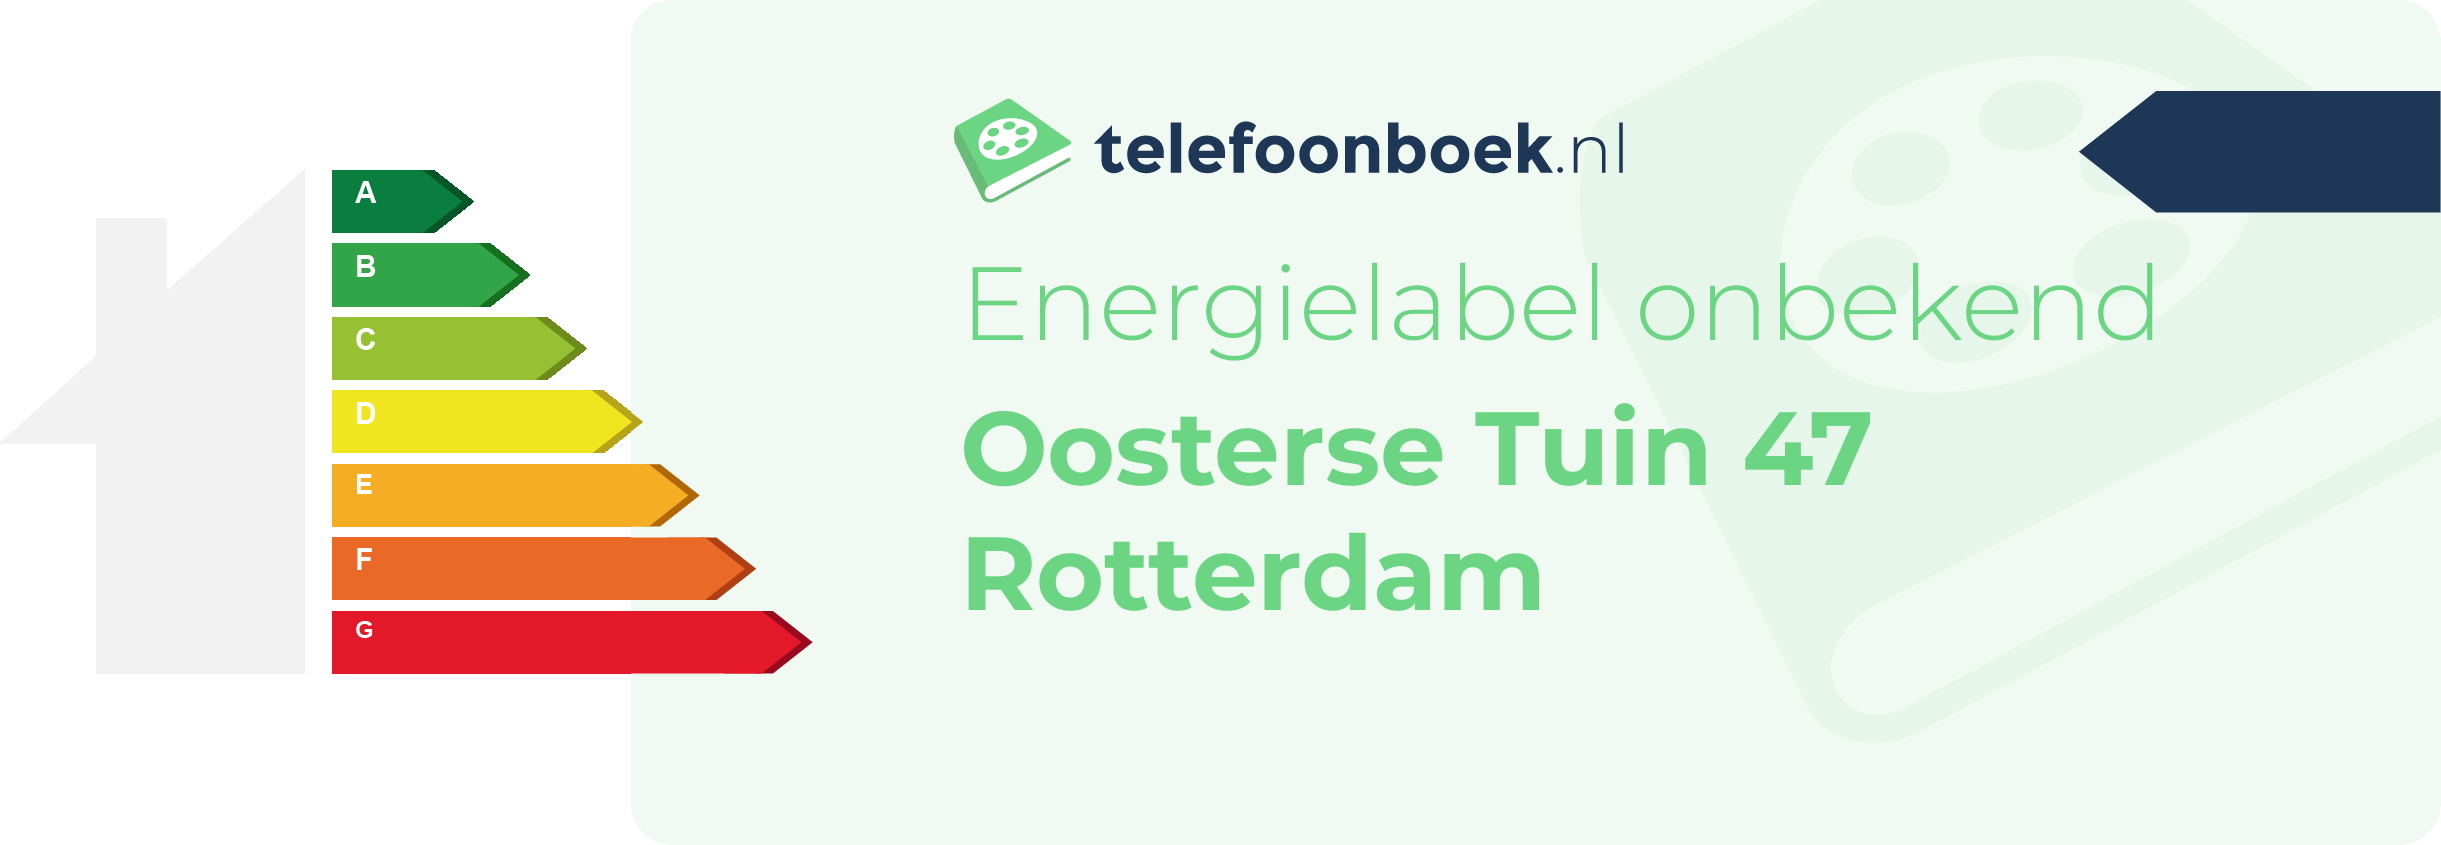 Energielabel Oosterse Tuin 47 Rotterdam